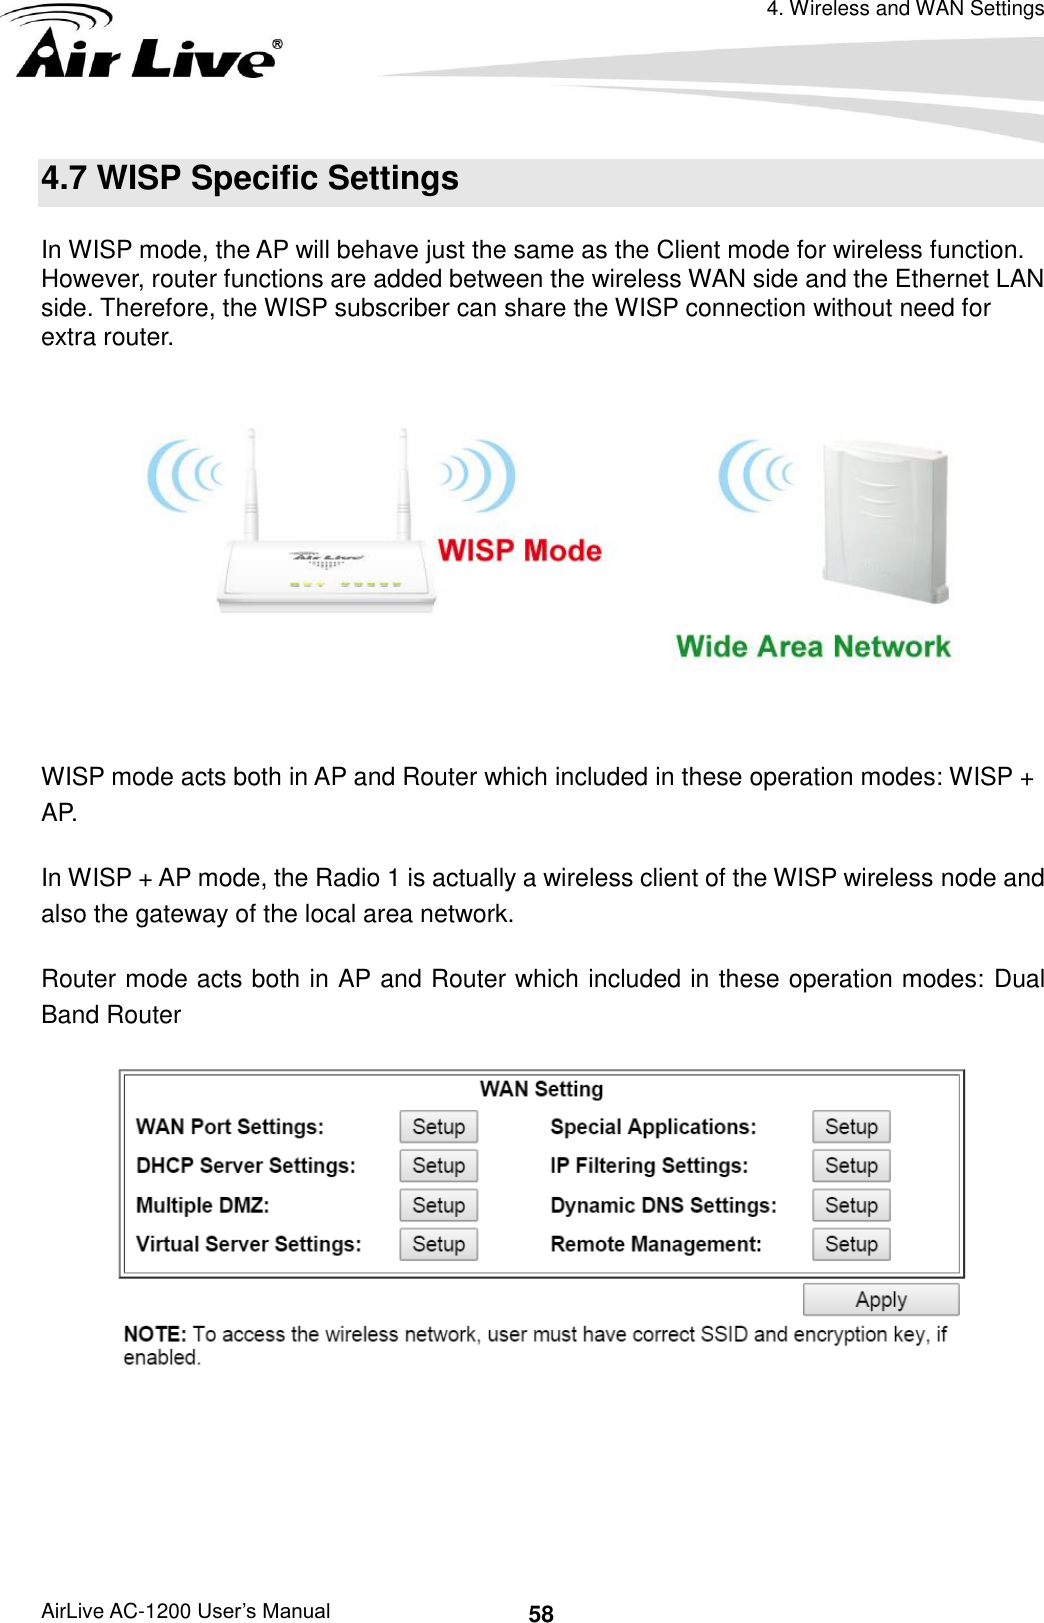 4. Wireless and WAN Settings AirLive AC-1200 User’s Manual 58 4.7 WISP Specific Settings In WISP mode, the AP will behave just the same as the Client mode for wireless function. However, router functions are added between the wireless WAN side and the Ethernet LAN side. Therefore, the WISP subscriber can share the WISP connection without need for extra router.     WISP mode acts both in AP and Router which included in these operation modes: WISP + AP.   In WISP + AP mode, the Radio 1 is actually a wireless client of the WISP wireless node and also the gateway of the local area network. Router mode acts both in AP and Router which included in these operation modes: Dual Band Router      